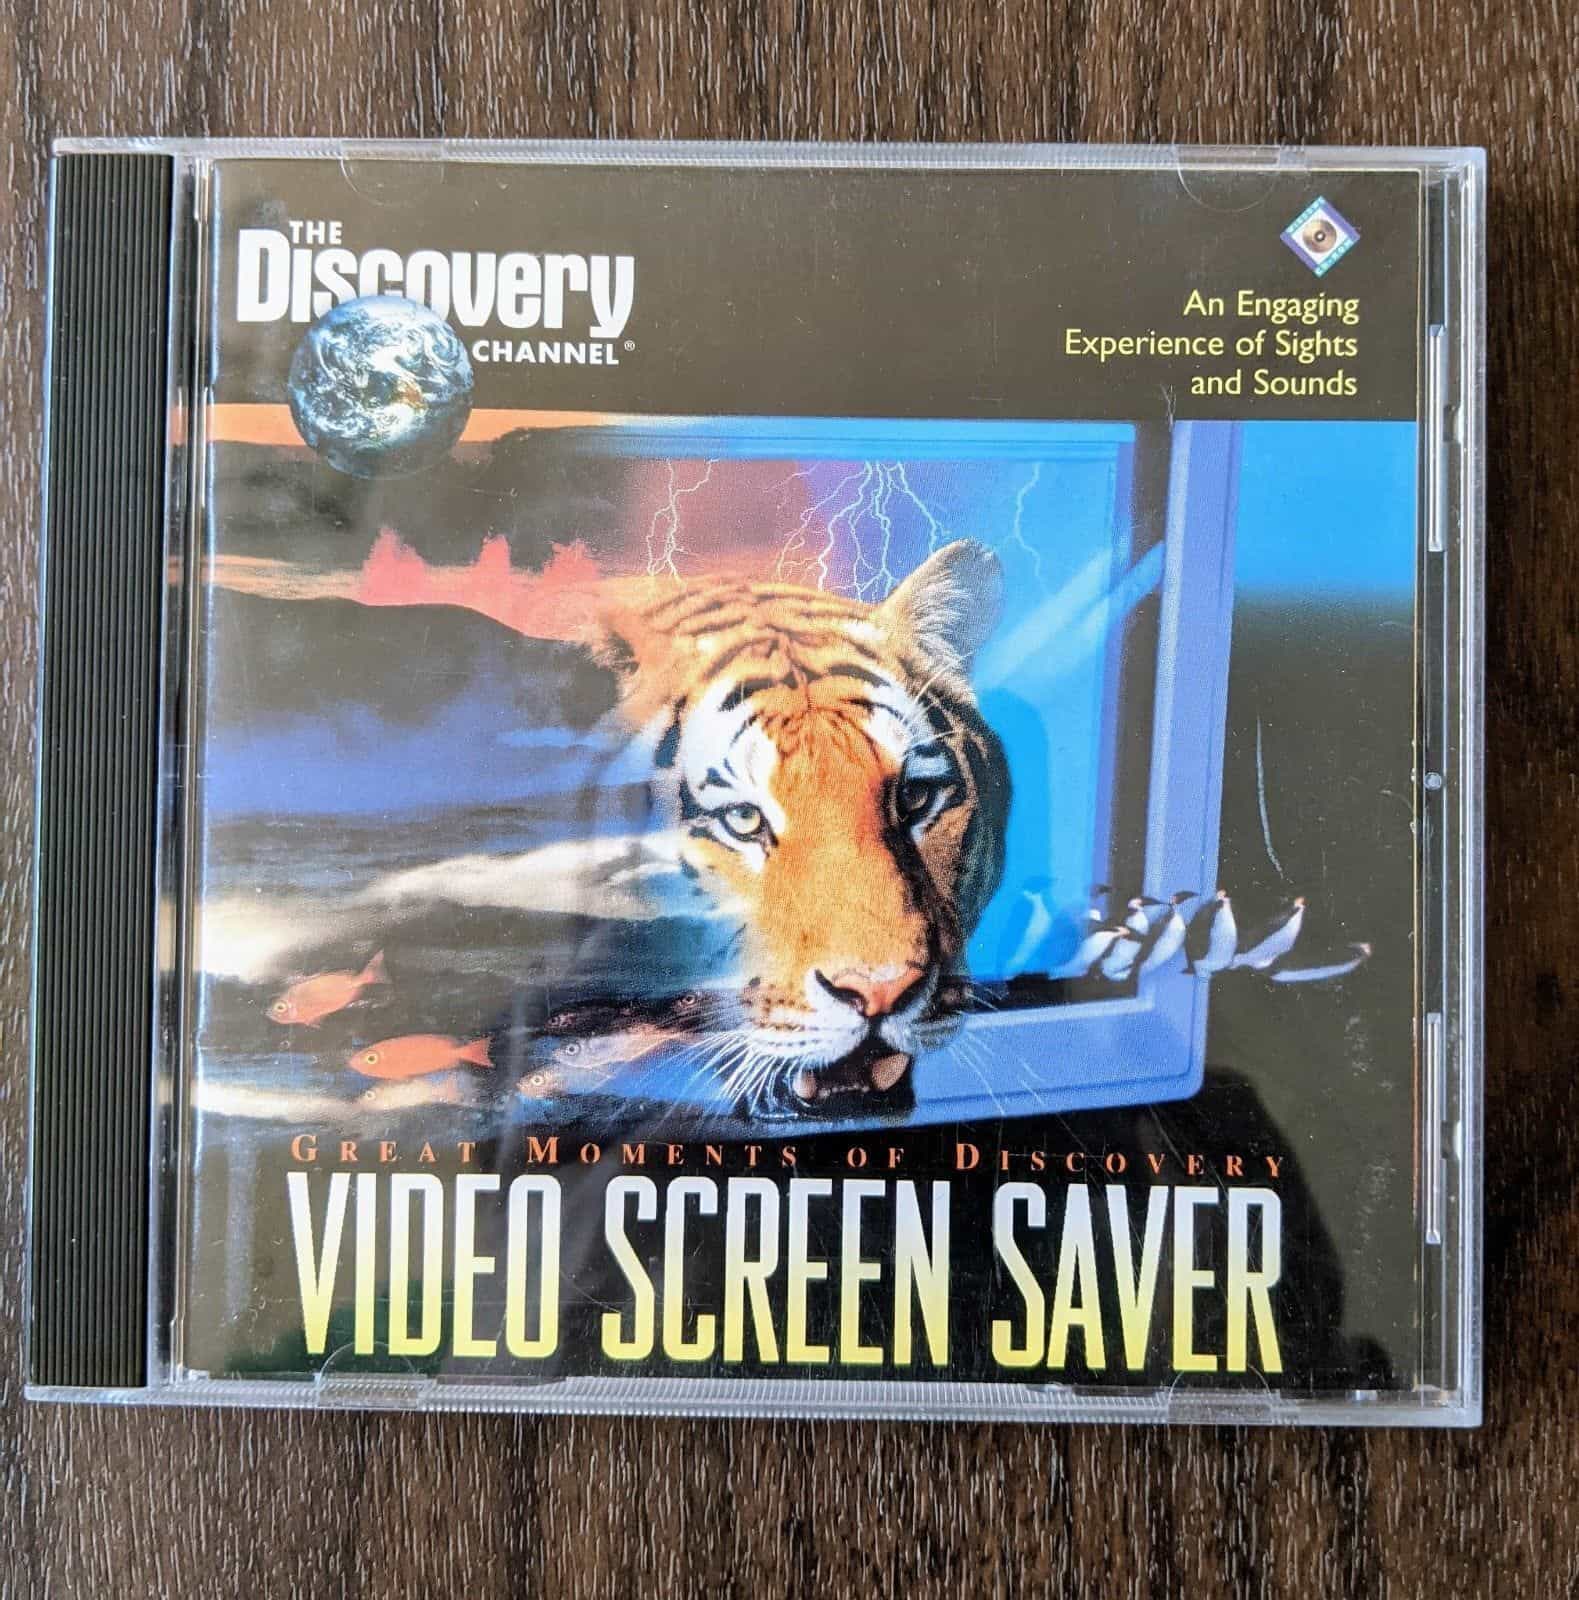 Great Moments of Discovery Video Screen Saver Software CD